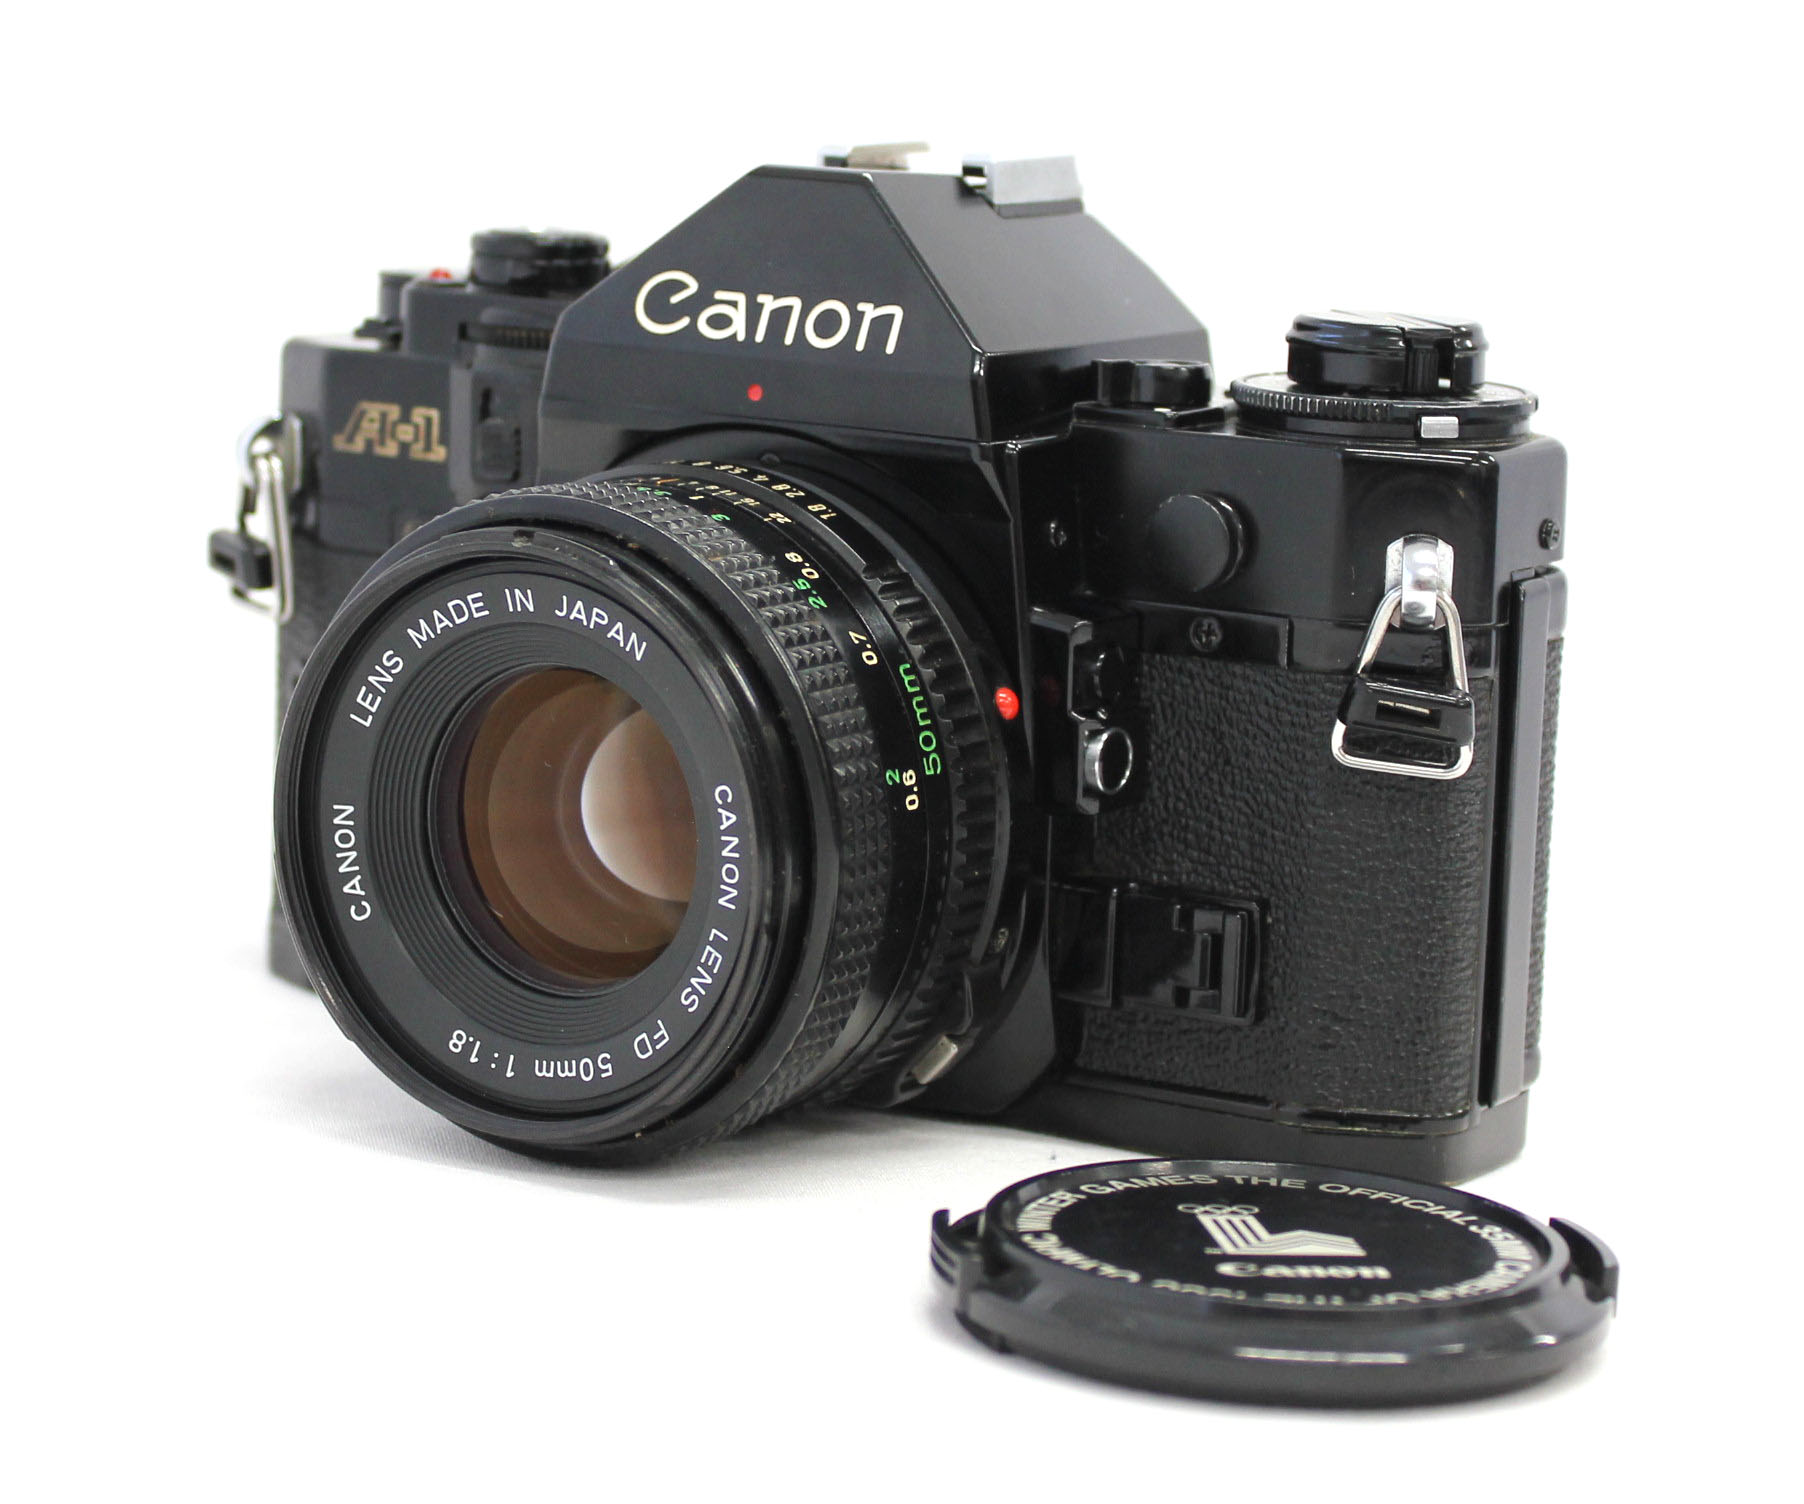 Japan Used Camera Shop | Canon A-1 35mm SLR Black with New FD 50mm F1.8 Lens & Olympic Cap from Japan